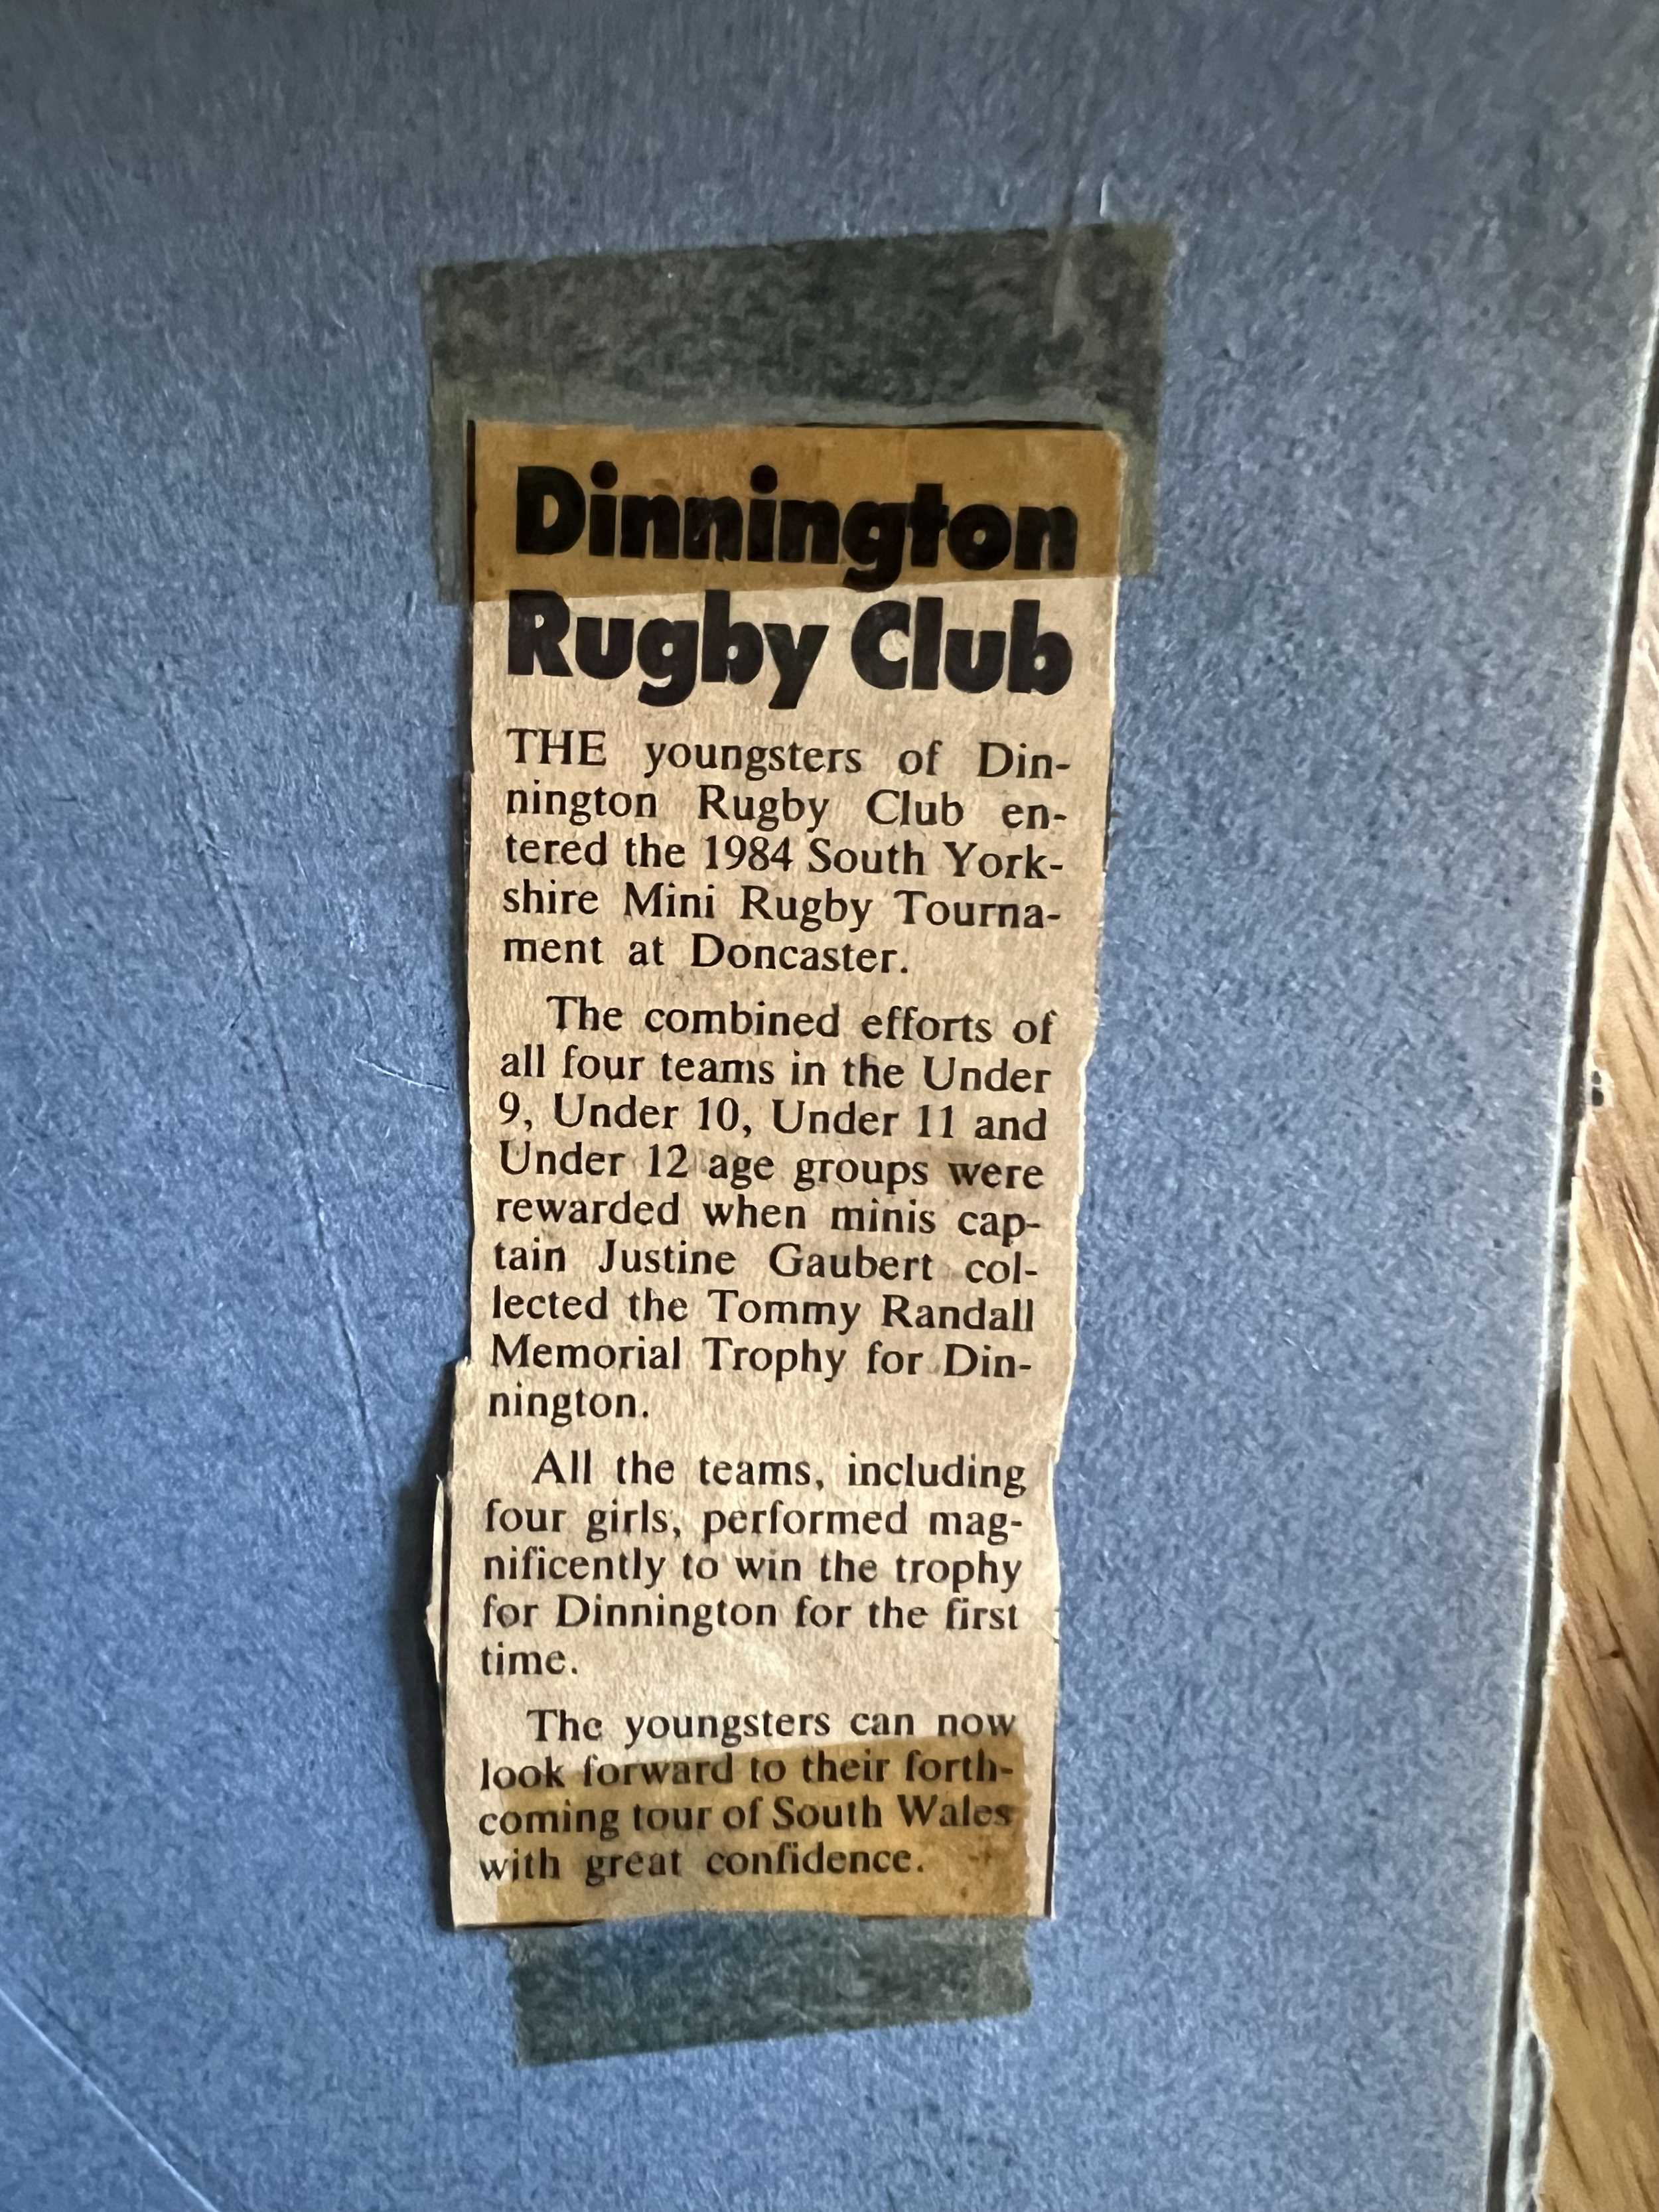 First woman to play rugby 1979 newspaper clip 1.png